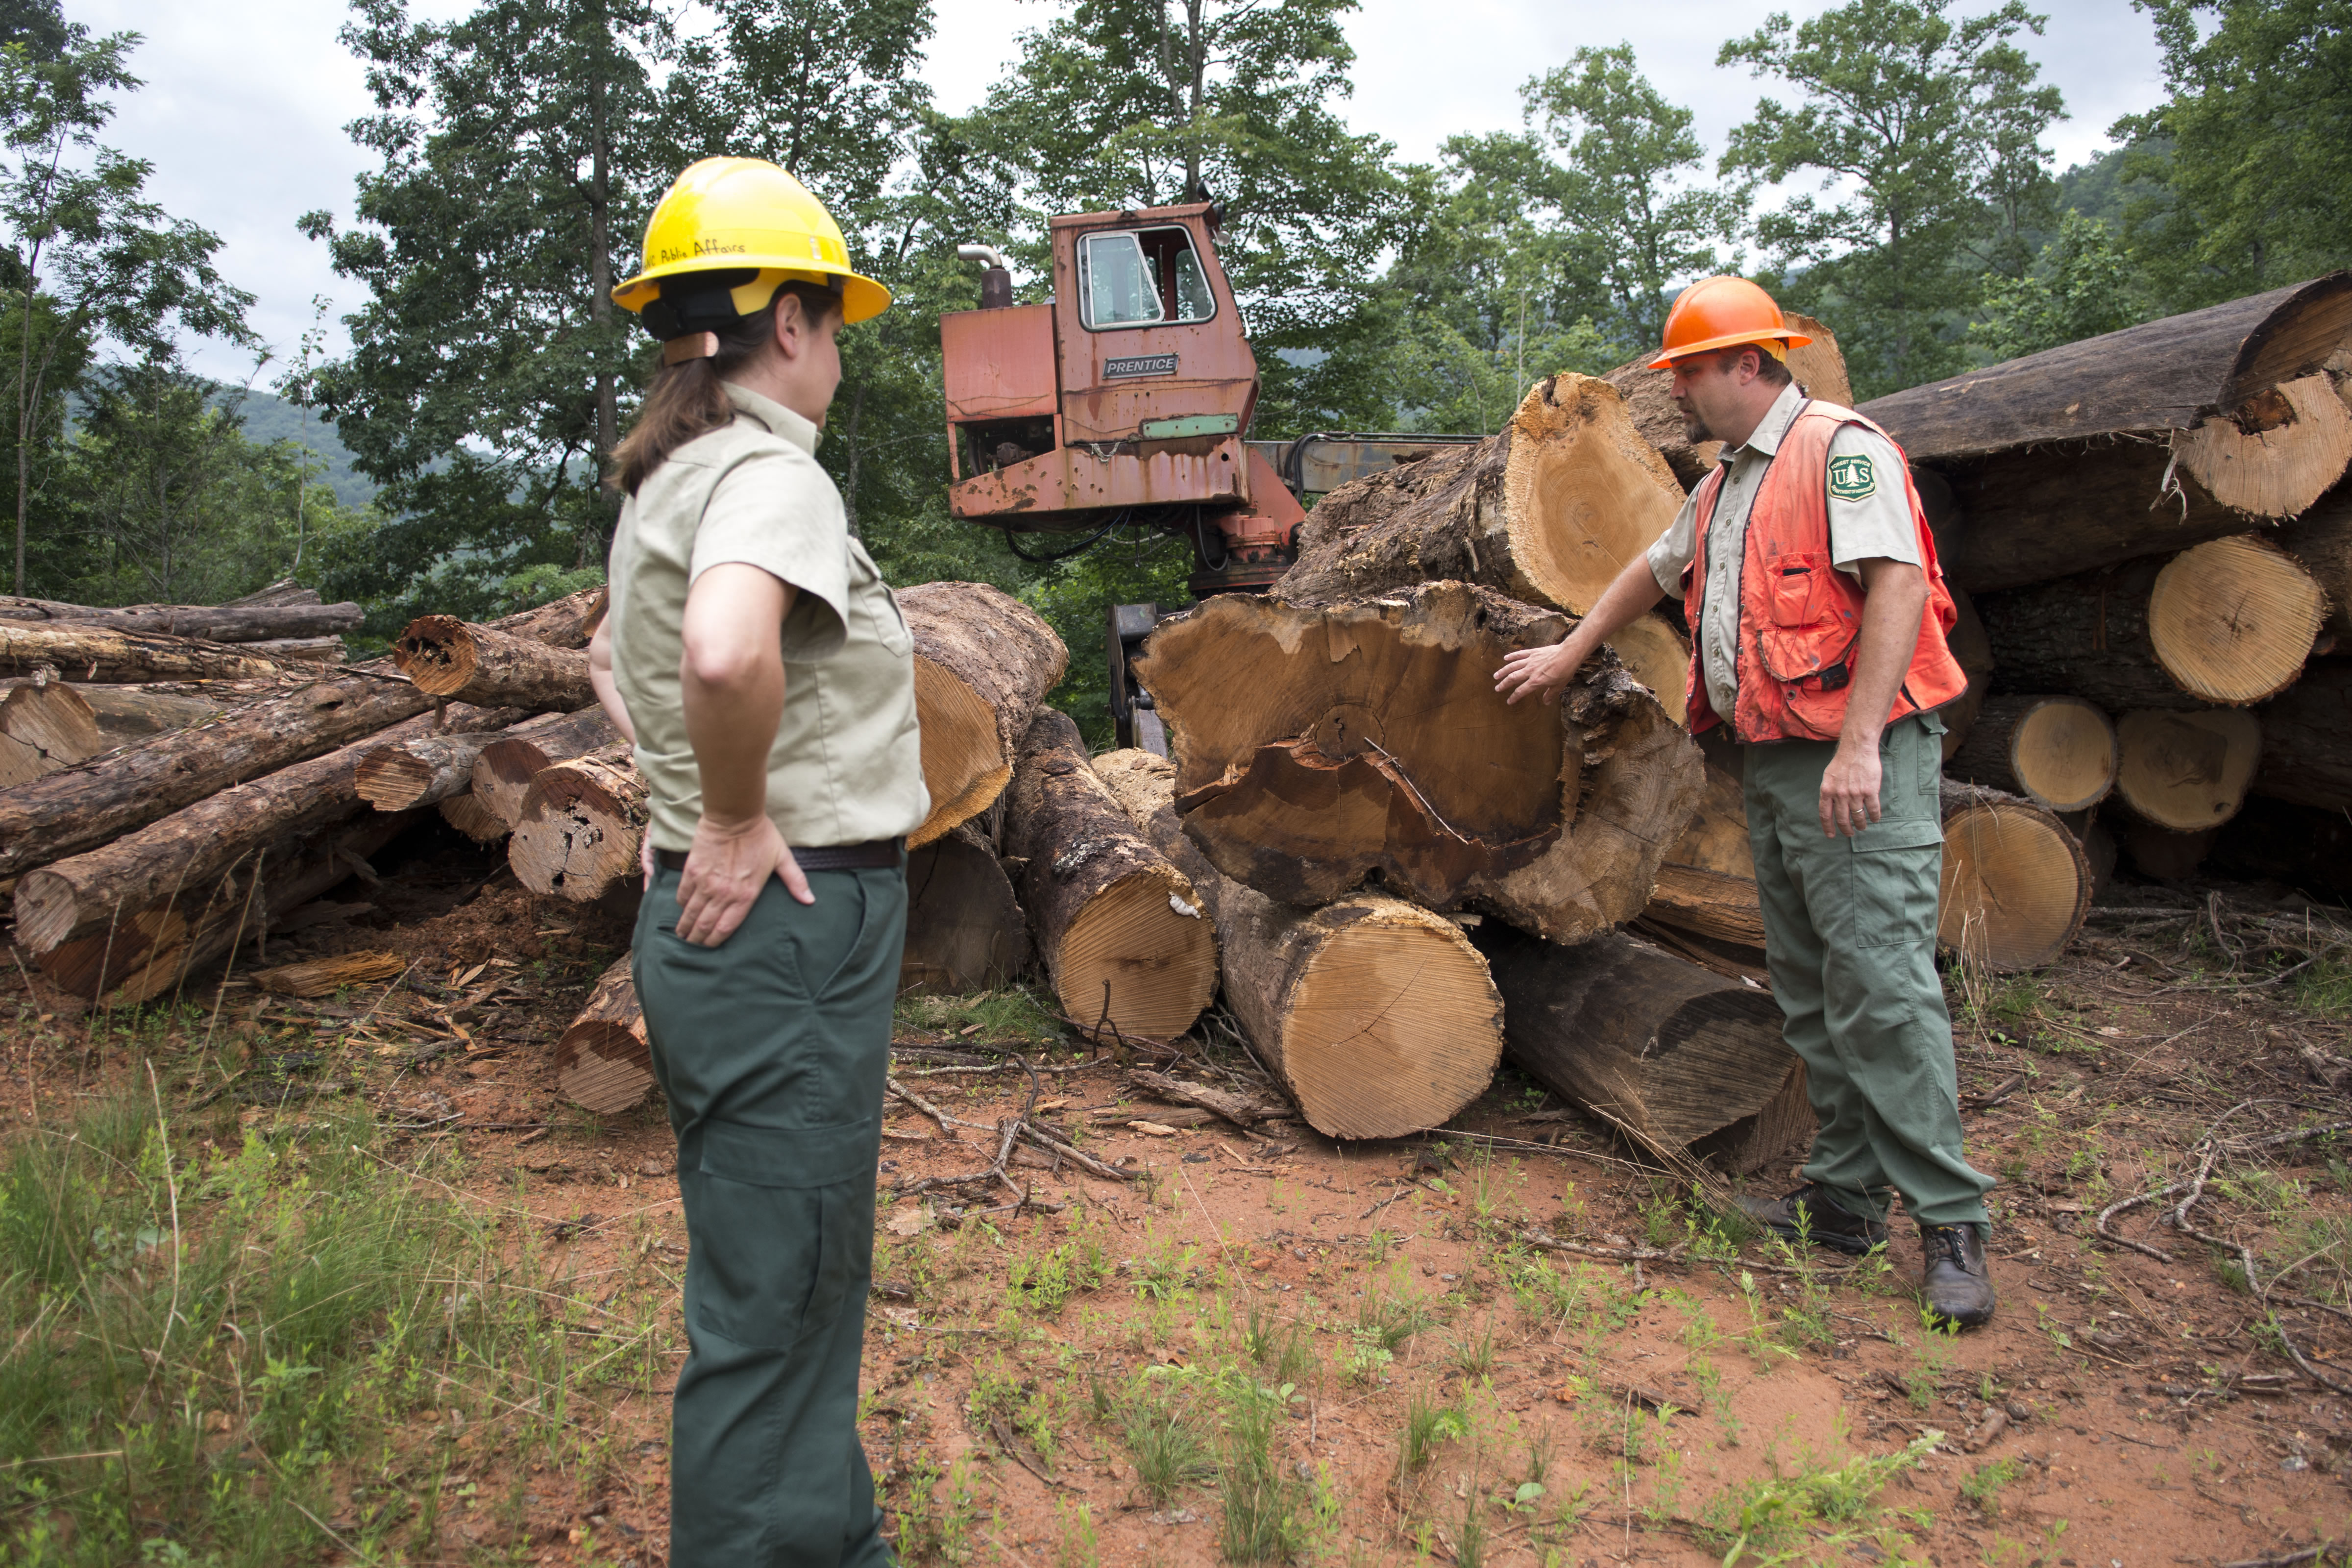 Patrick Scott and a Forest Service Public Affairs Officer look at a wood deck at a timber sale.